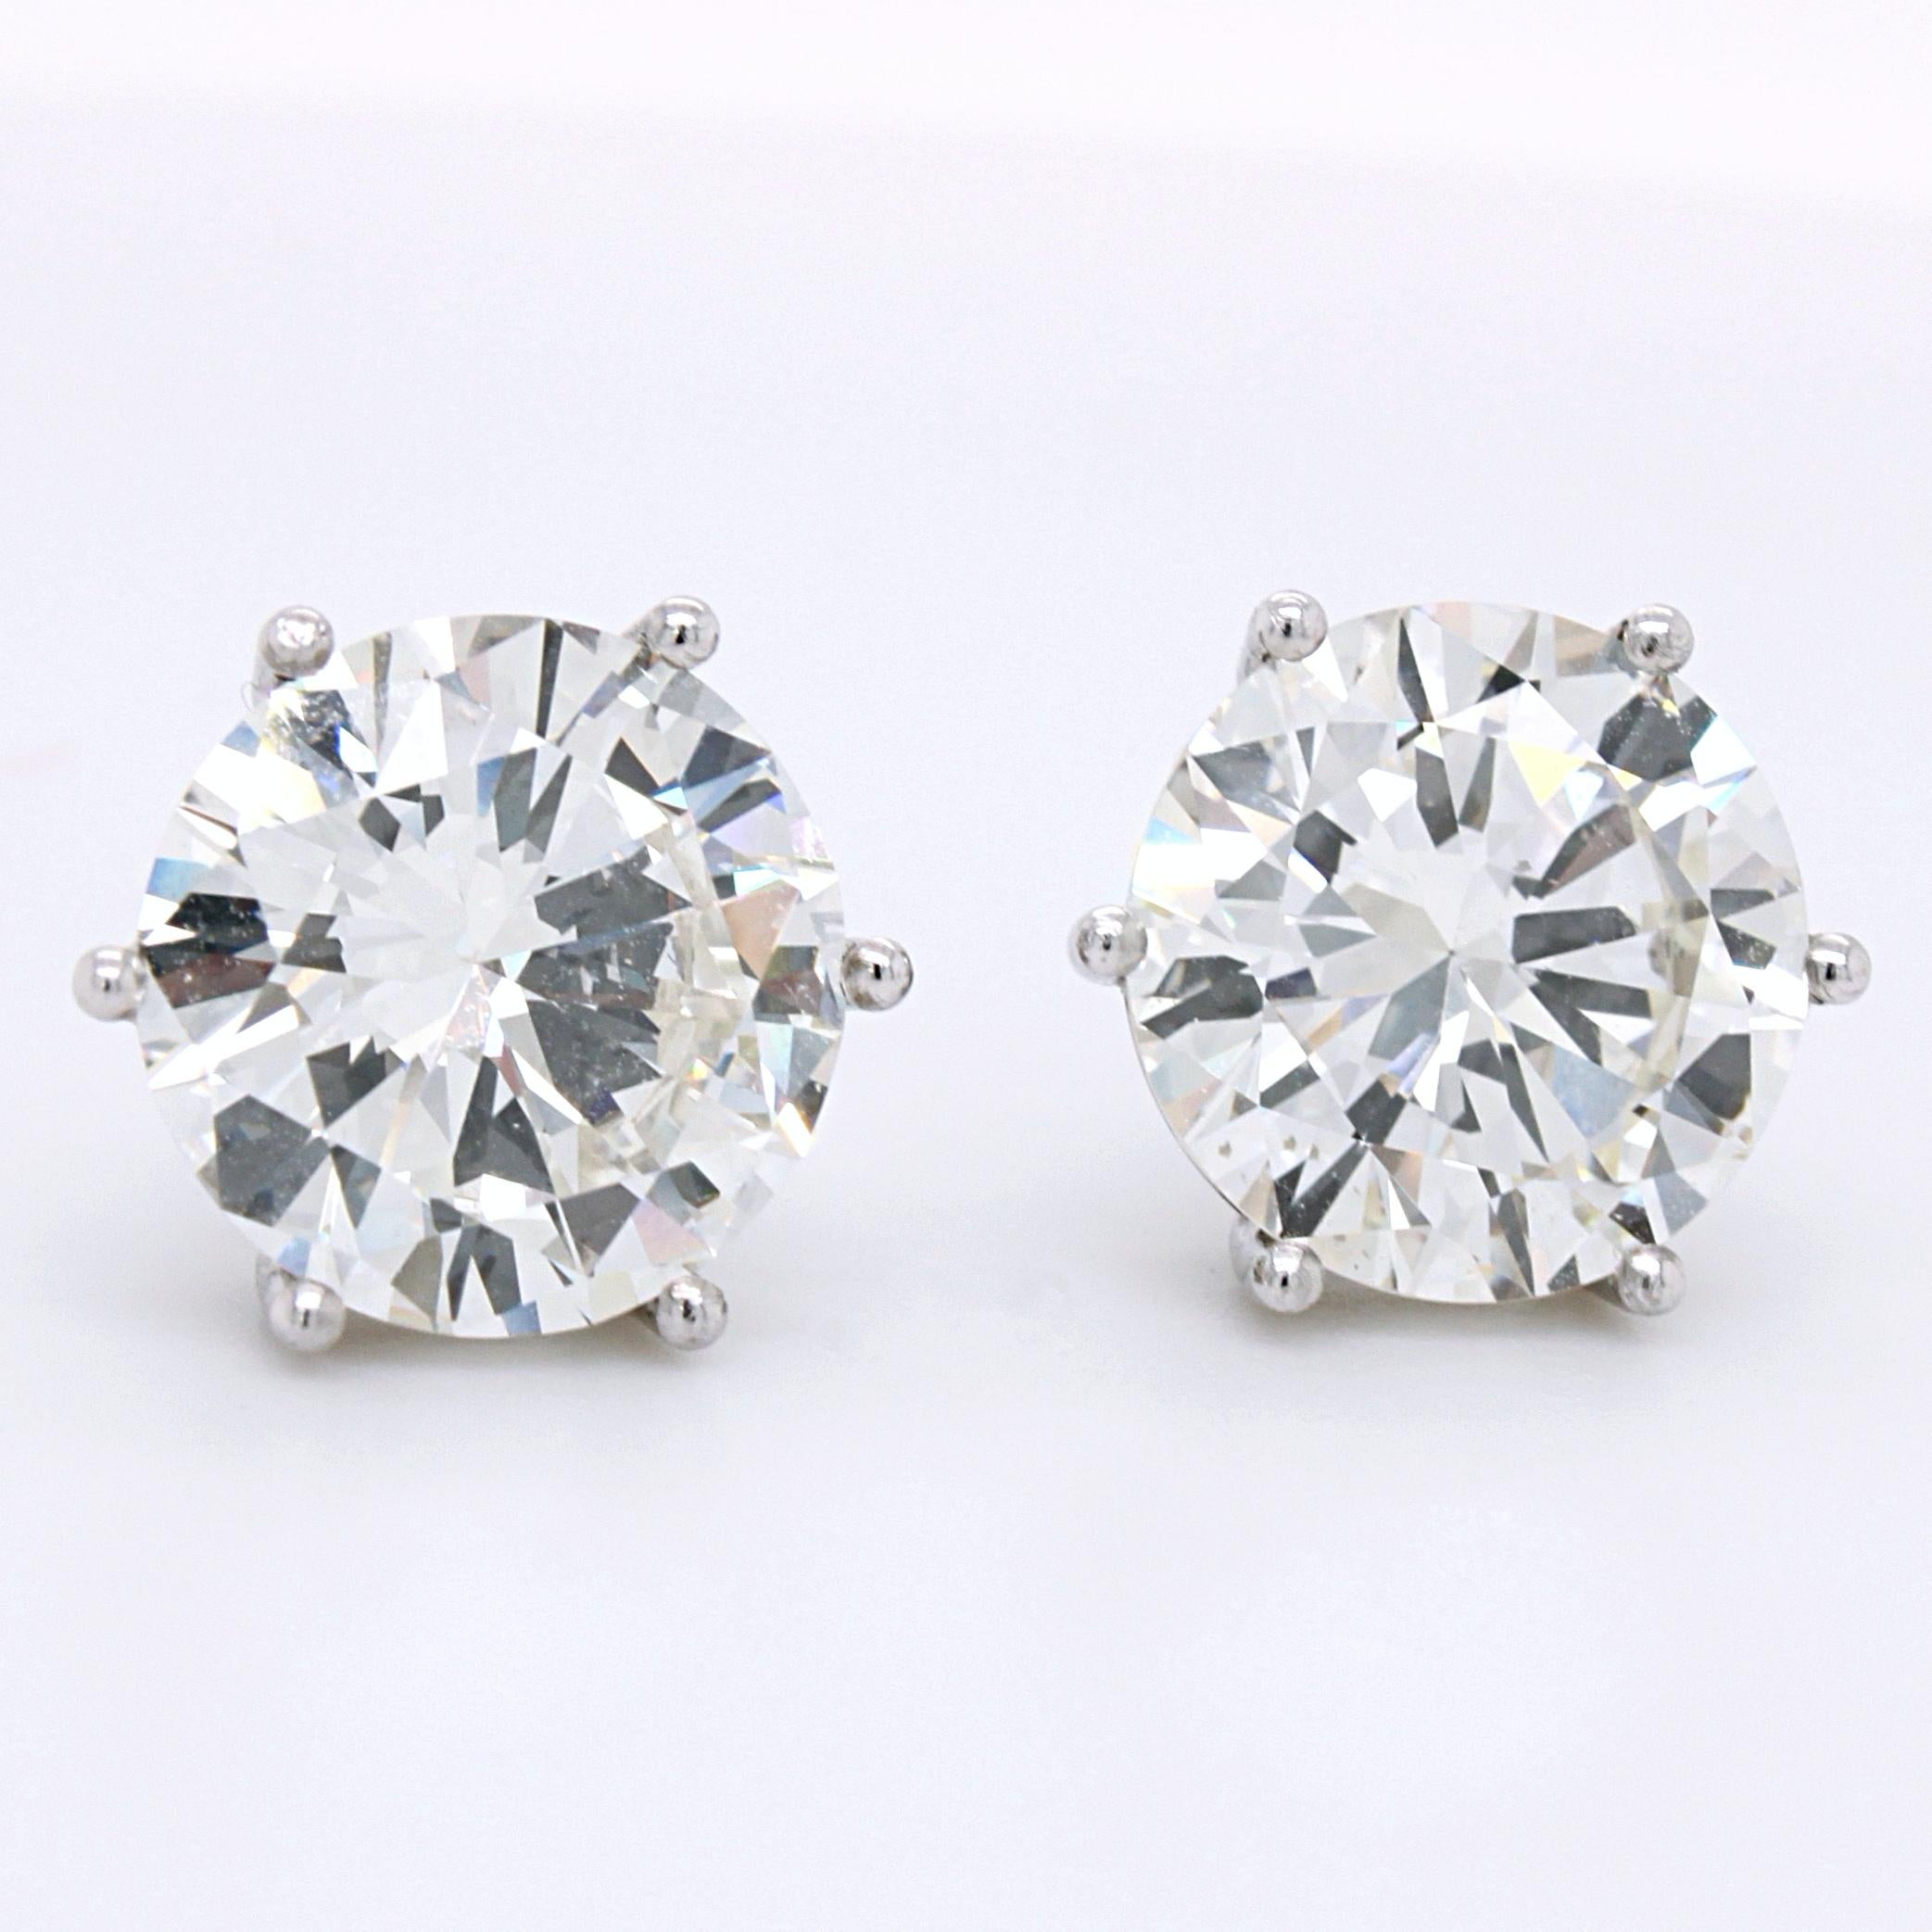 A beautiful pair of diamond solitaire earstuds in 18k white gold. The two diamonds weigh 3.01ct and 3.02ct respectively. Both have a J colour and VS1 clarity - accompanied by two GIA certificates.